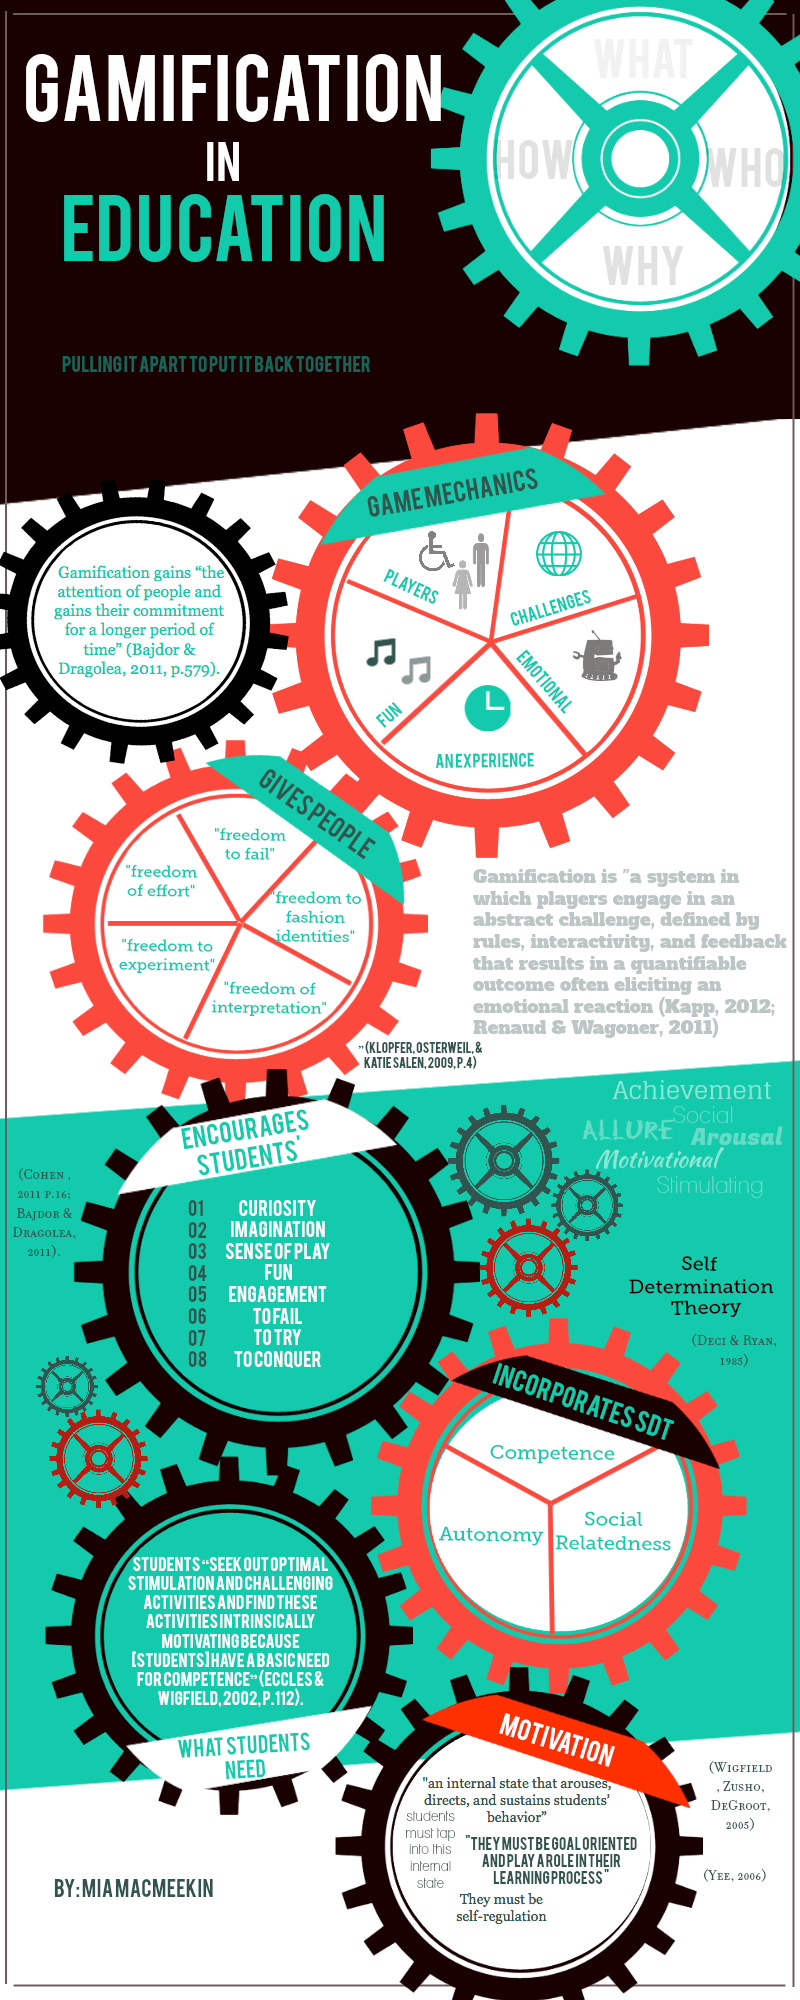 The Gears of Gamification in Education Infographic